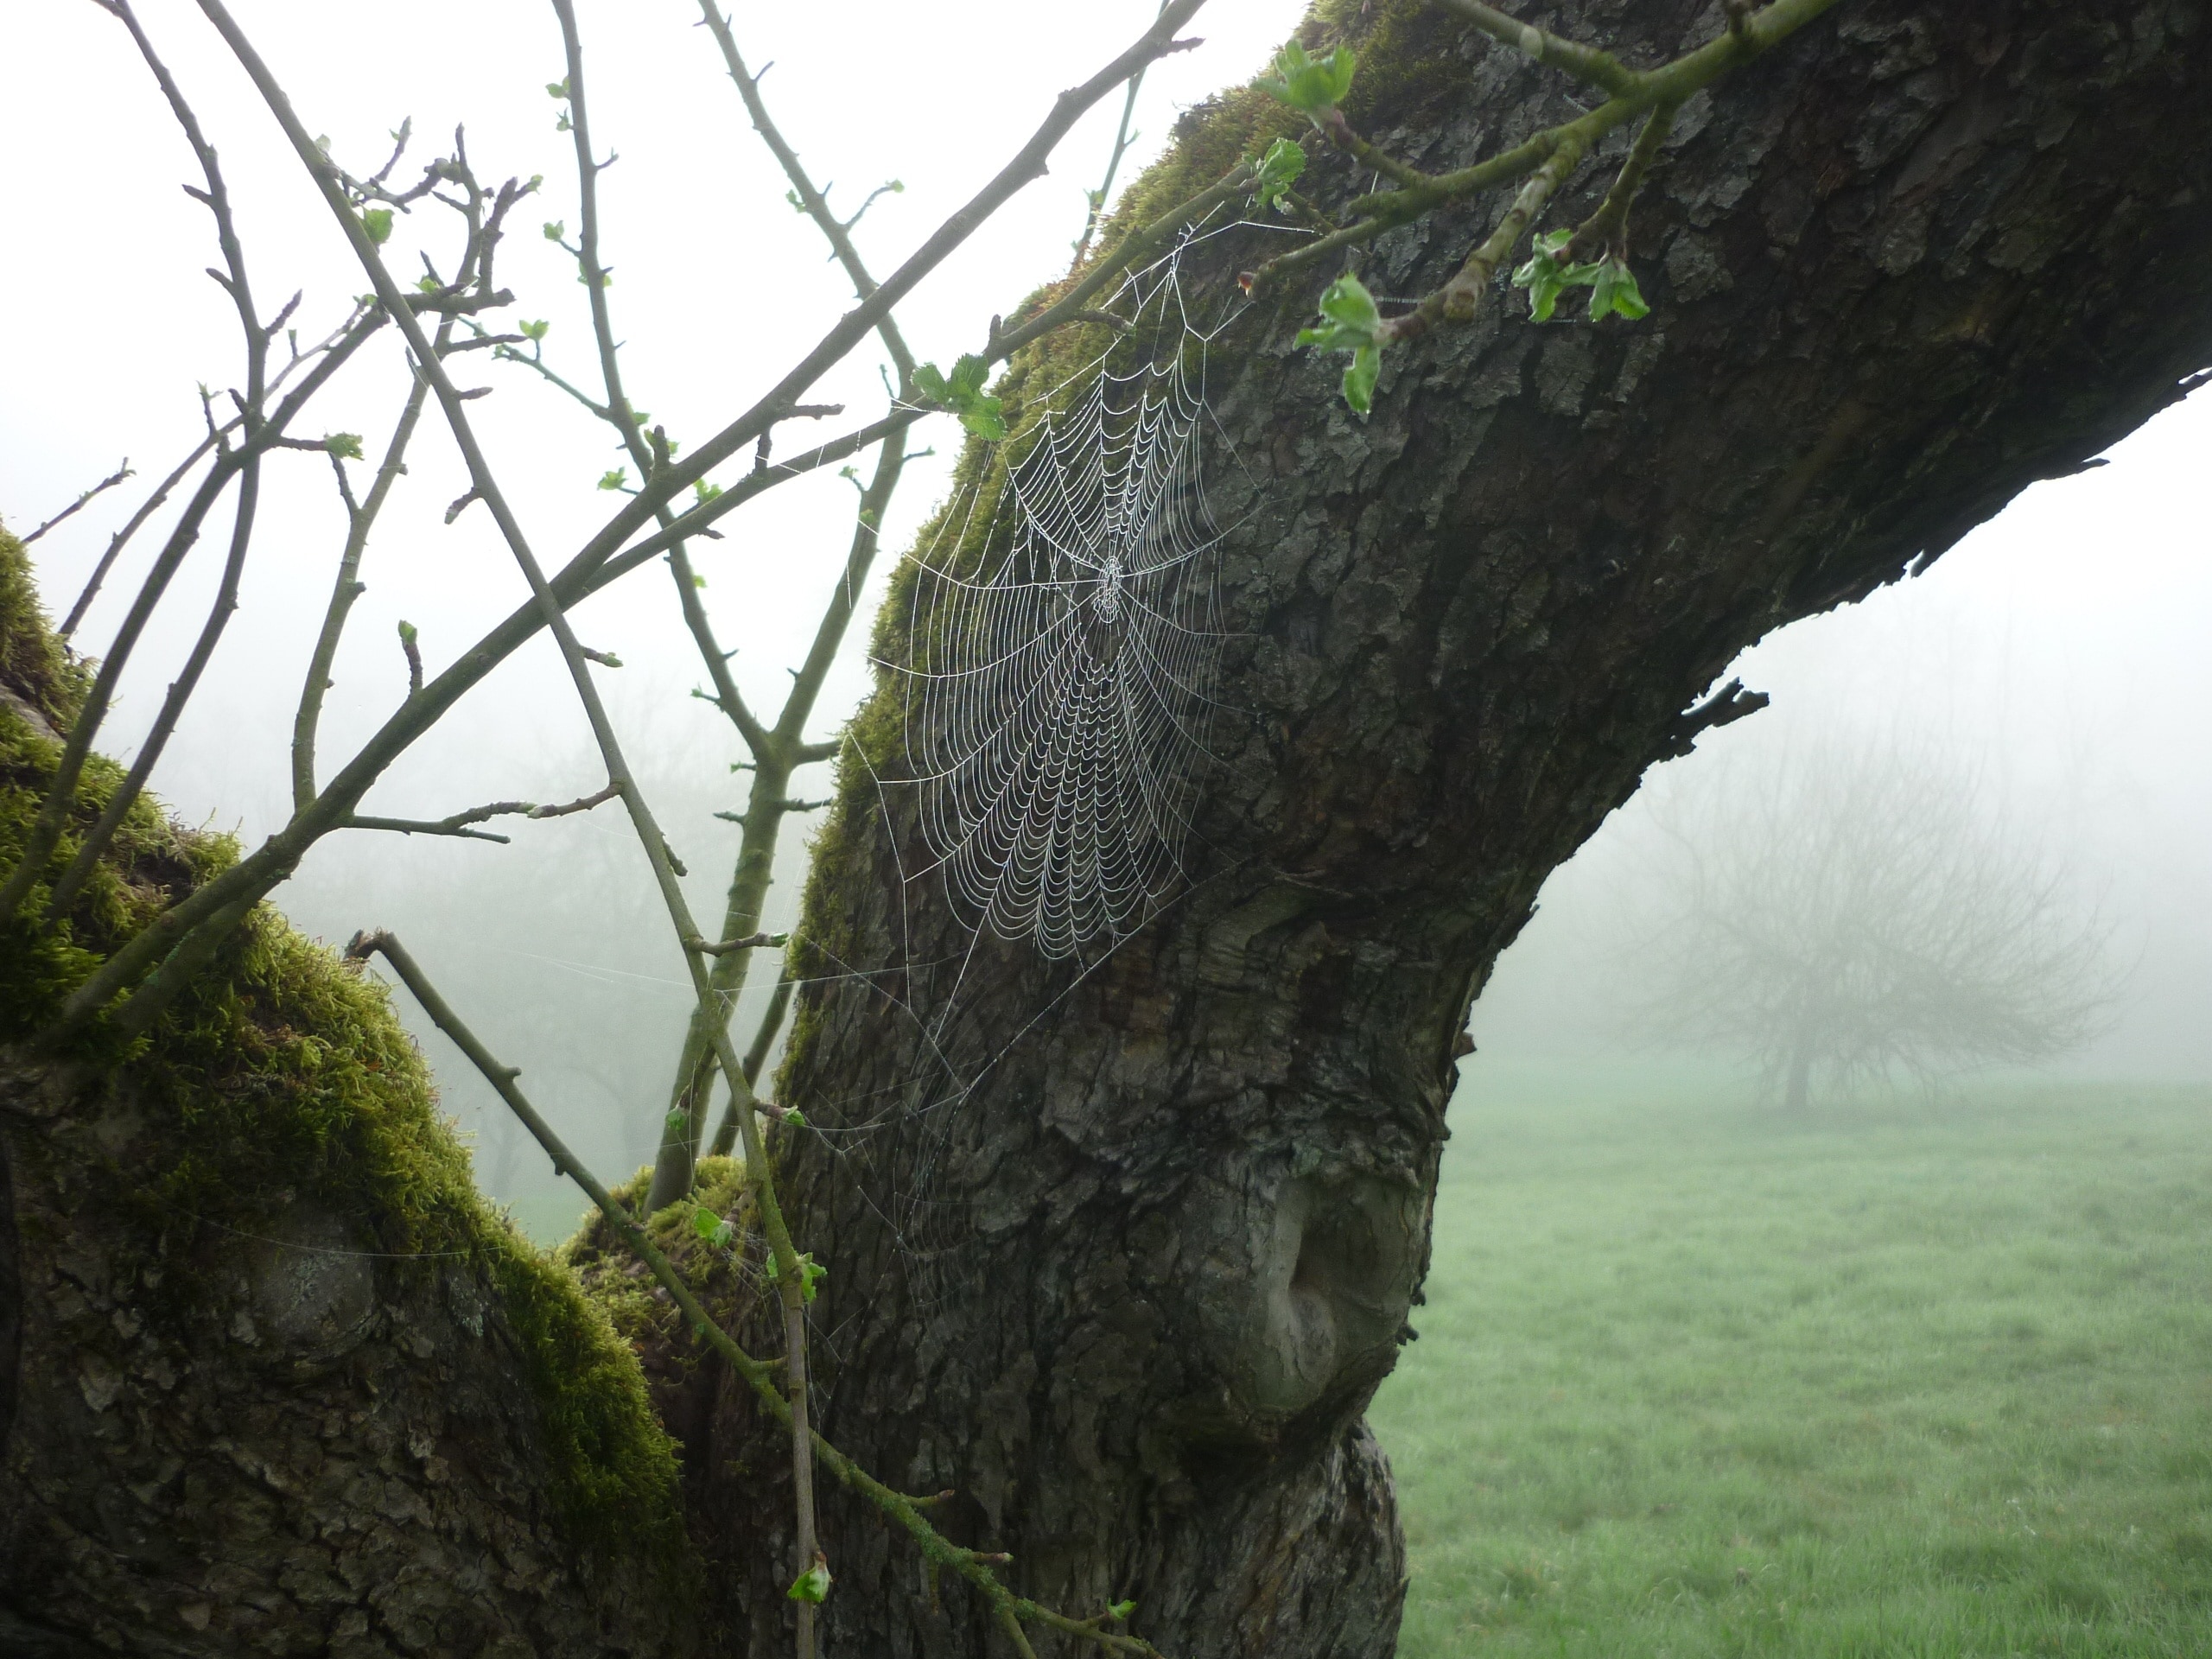 close up photo of spider web on gray tree trunk near green grass field